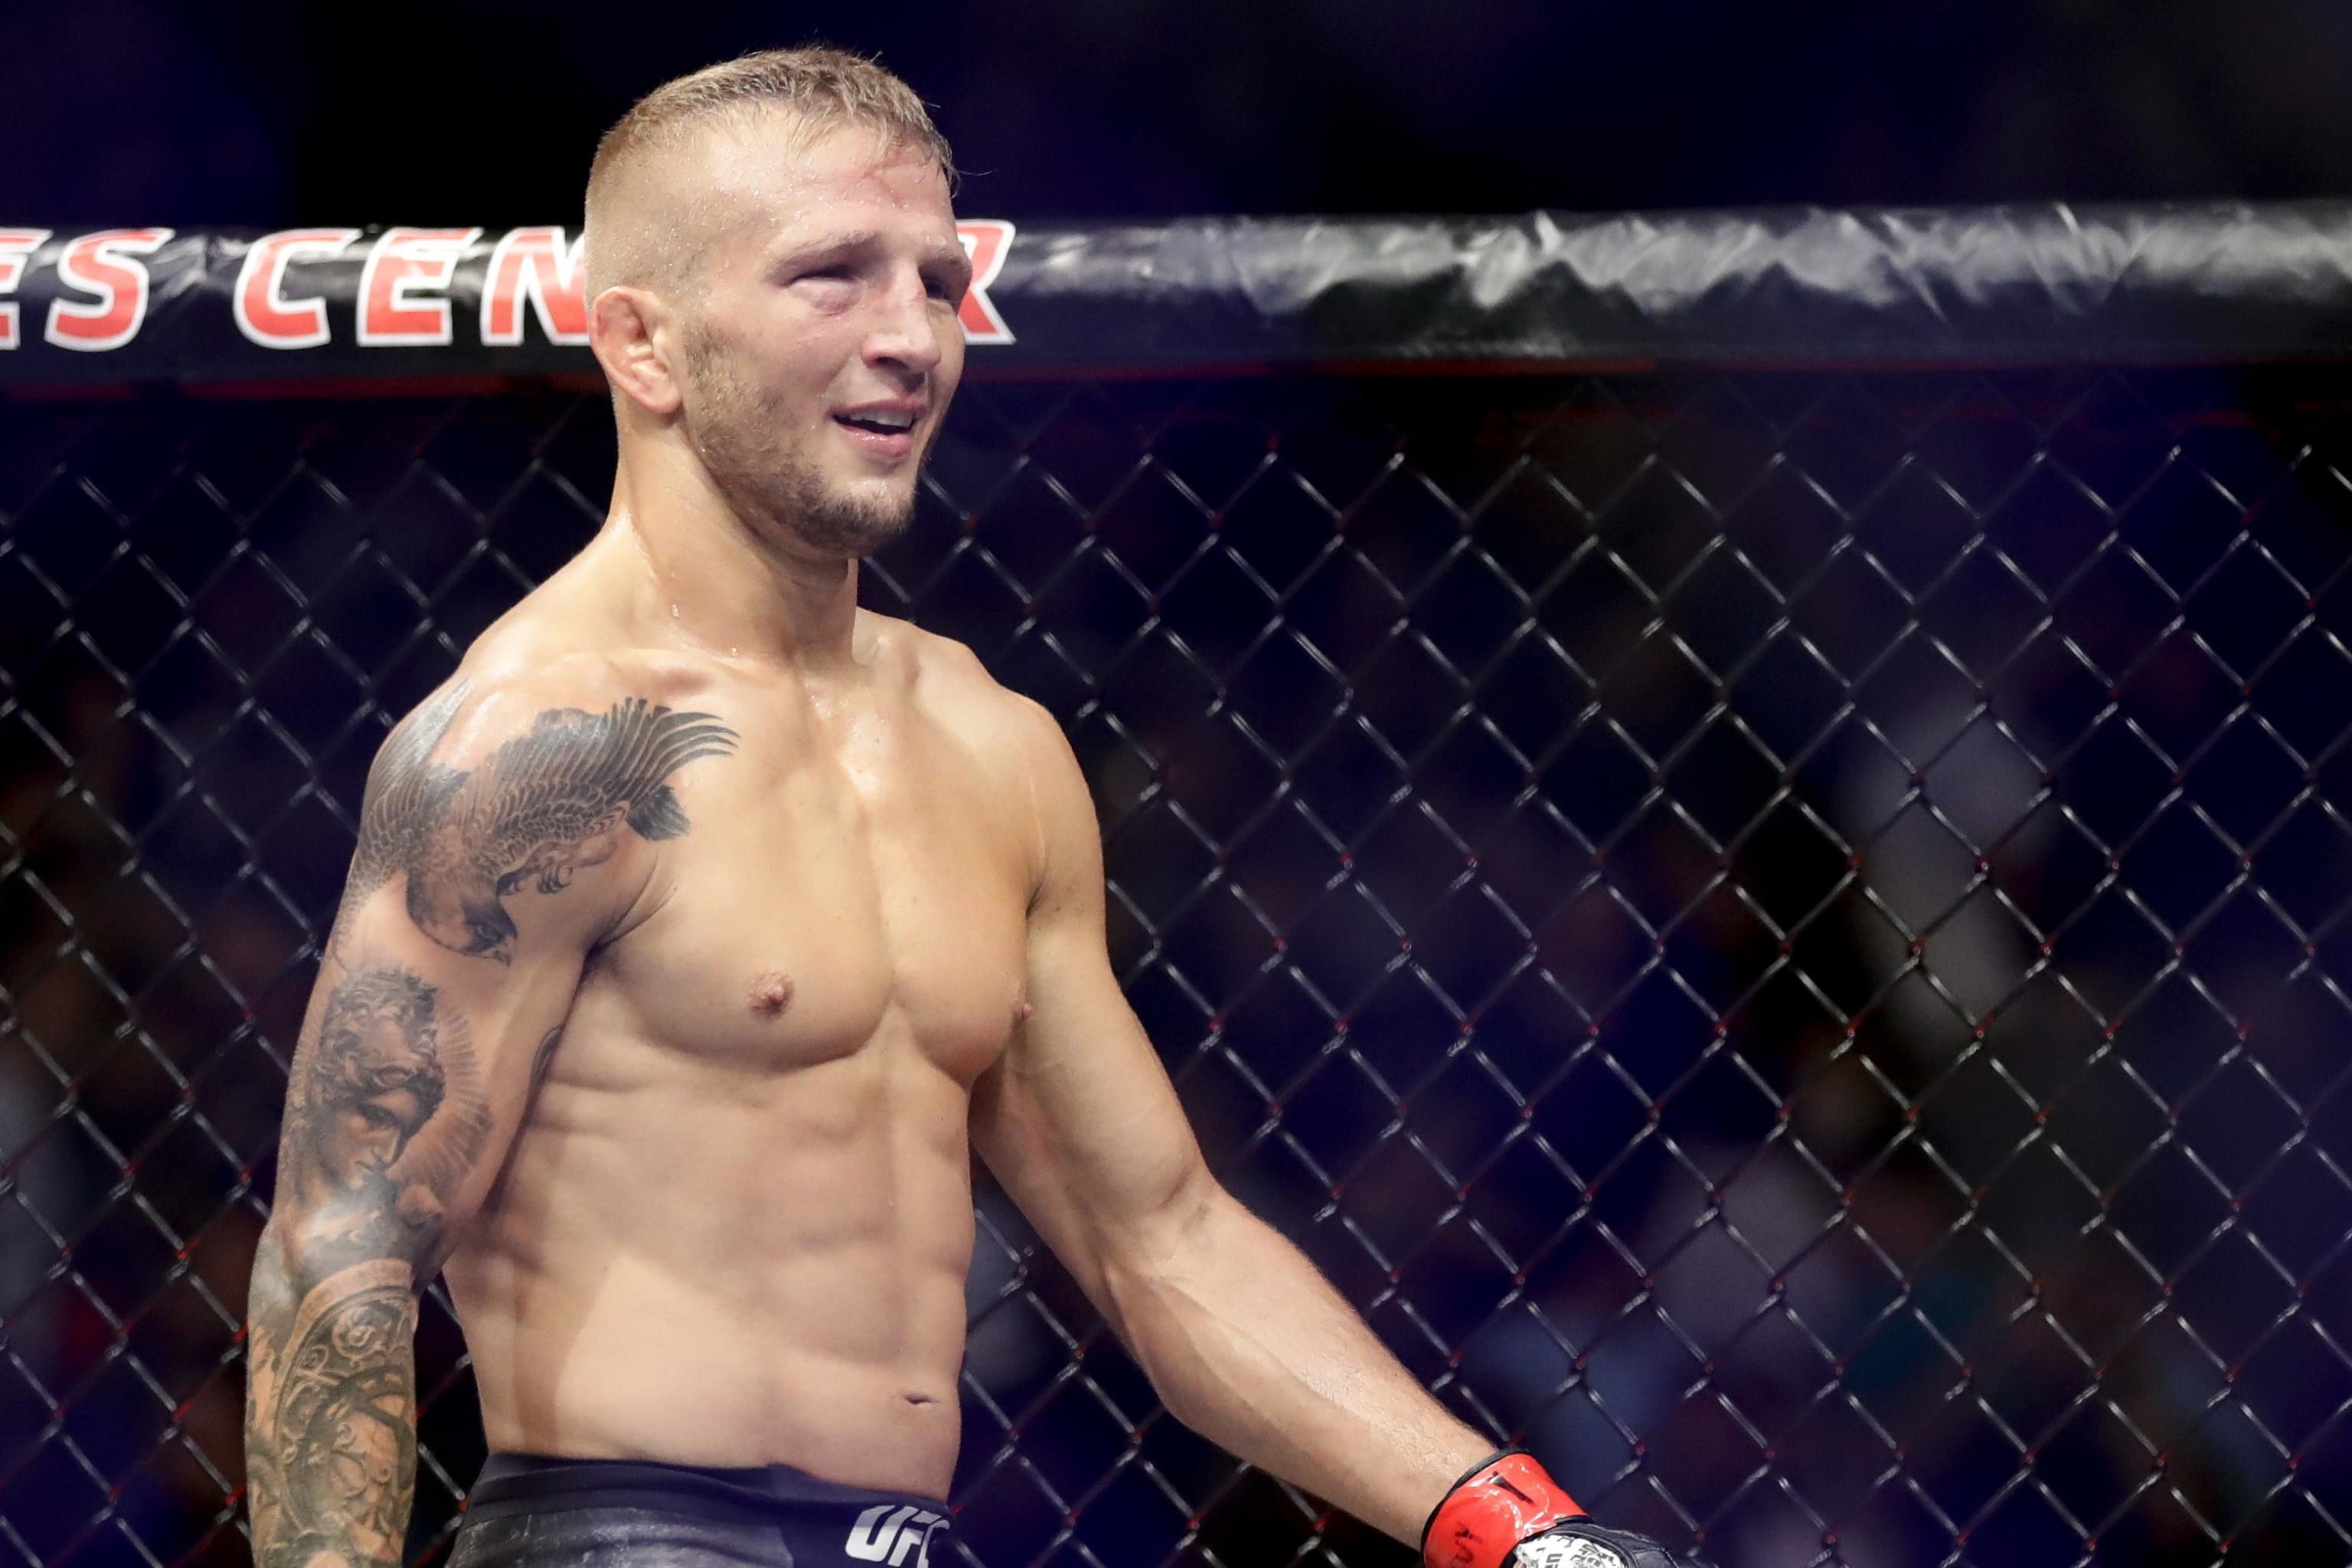 Dillashaw to Sterling: Cheater's gonna kick your ass, you bastard